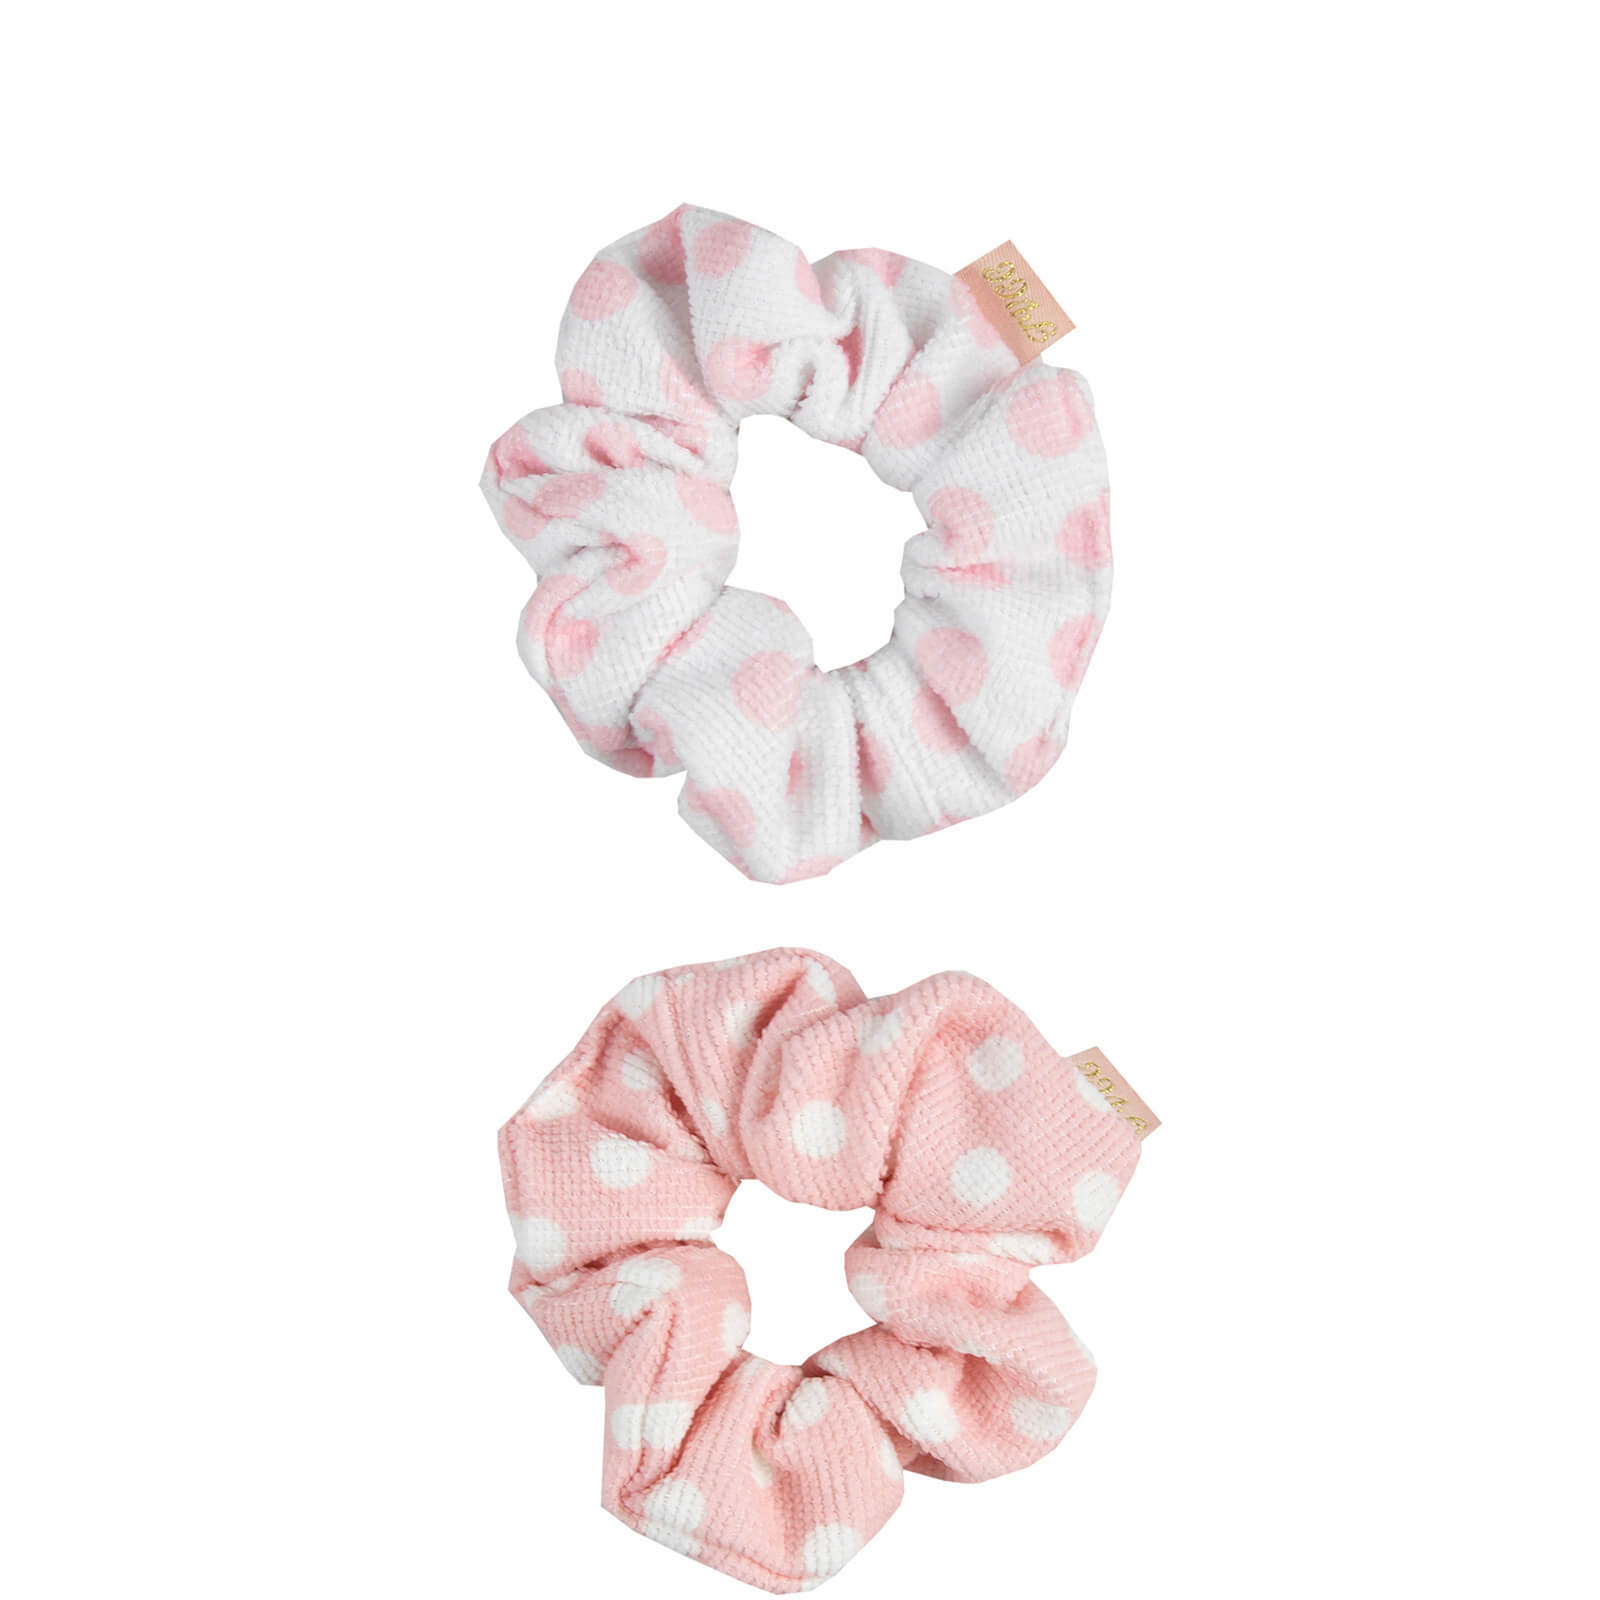 The Vintage Cosmetic Company Shower Microfibre Hair Scrunchies - Pink Polka Dot (2 Pack)